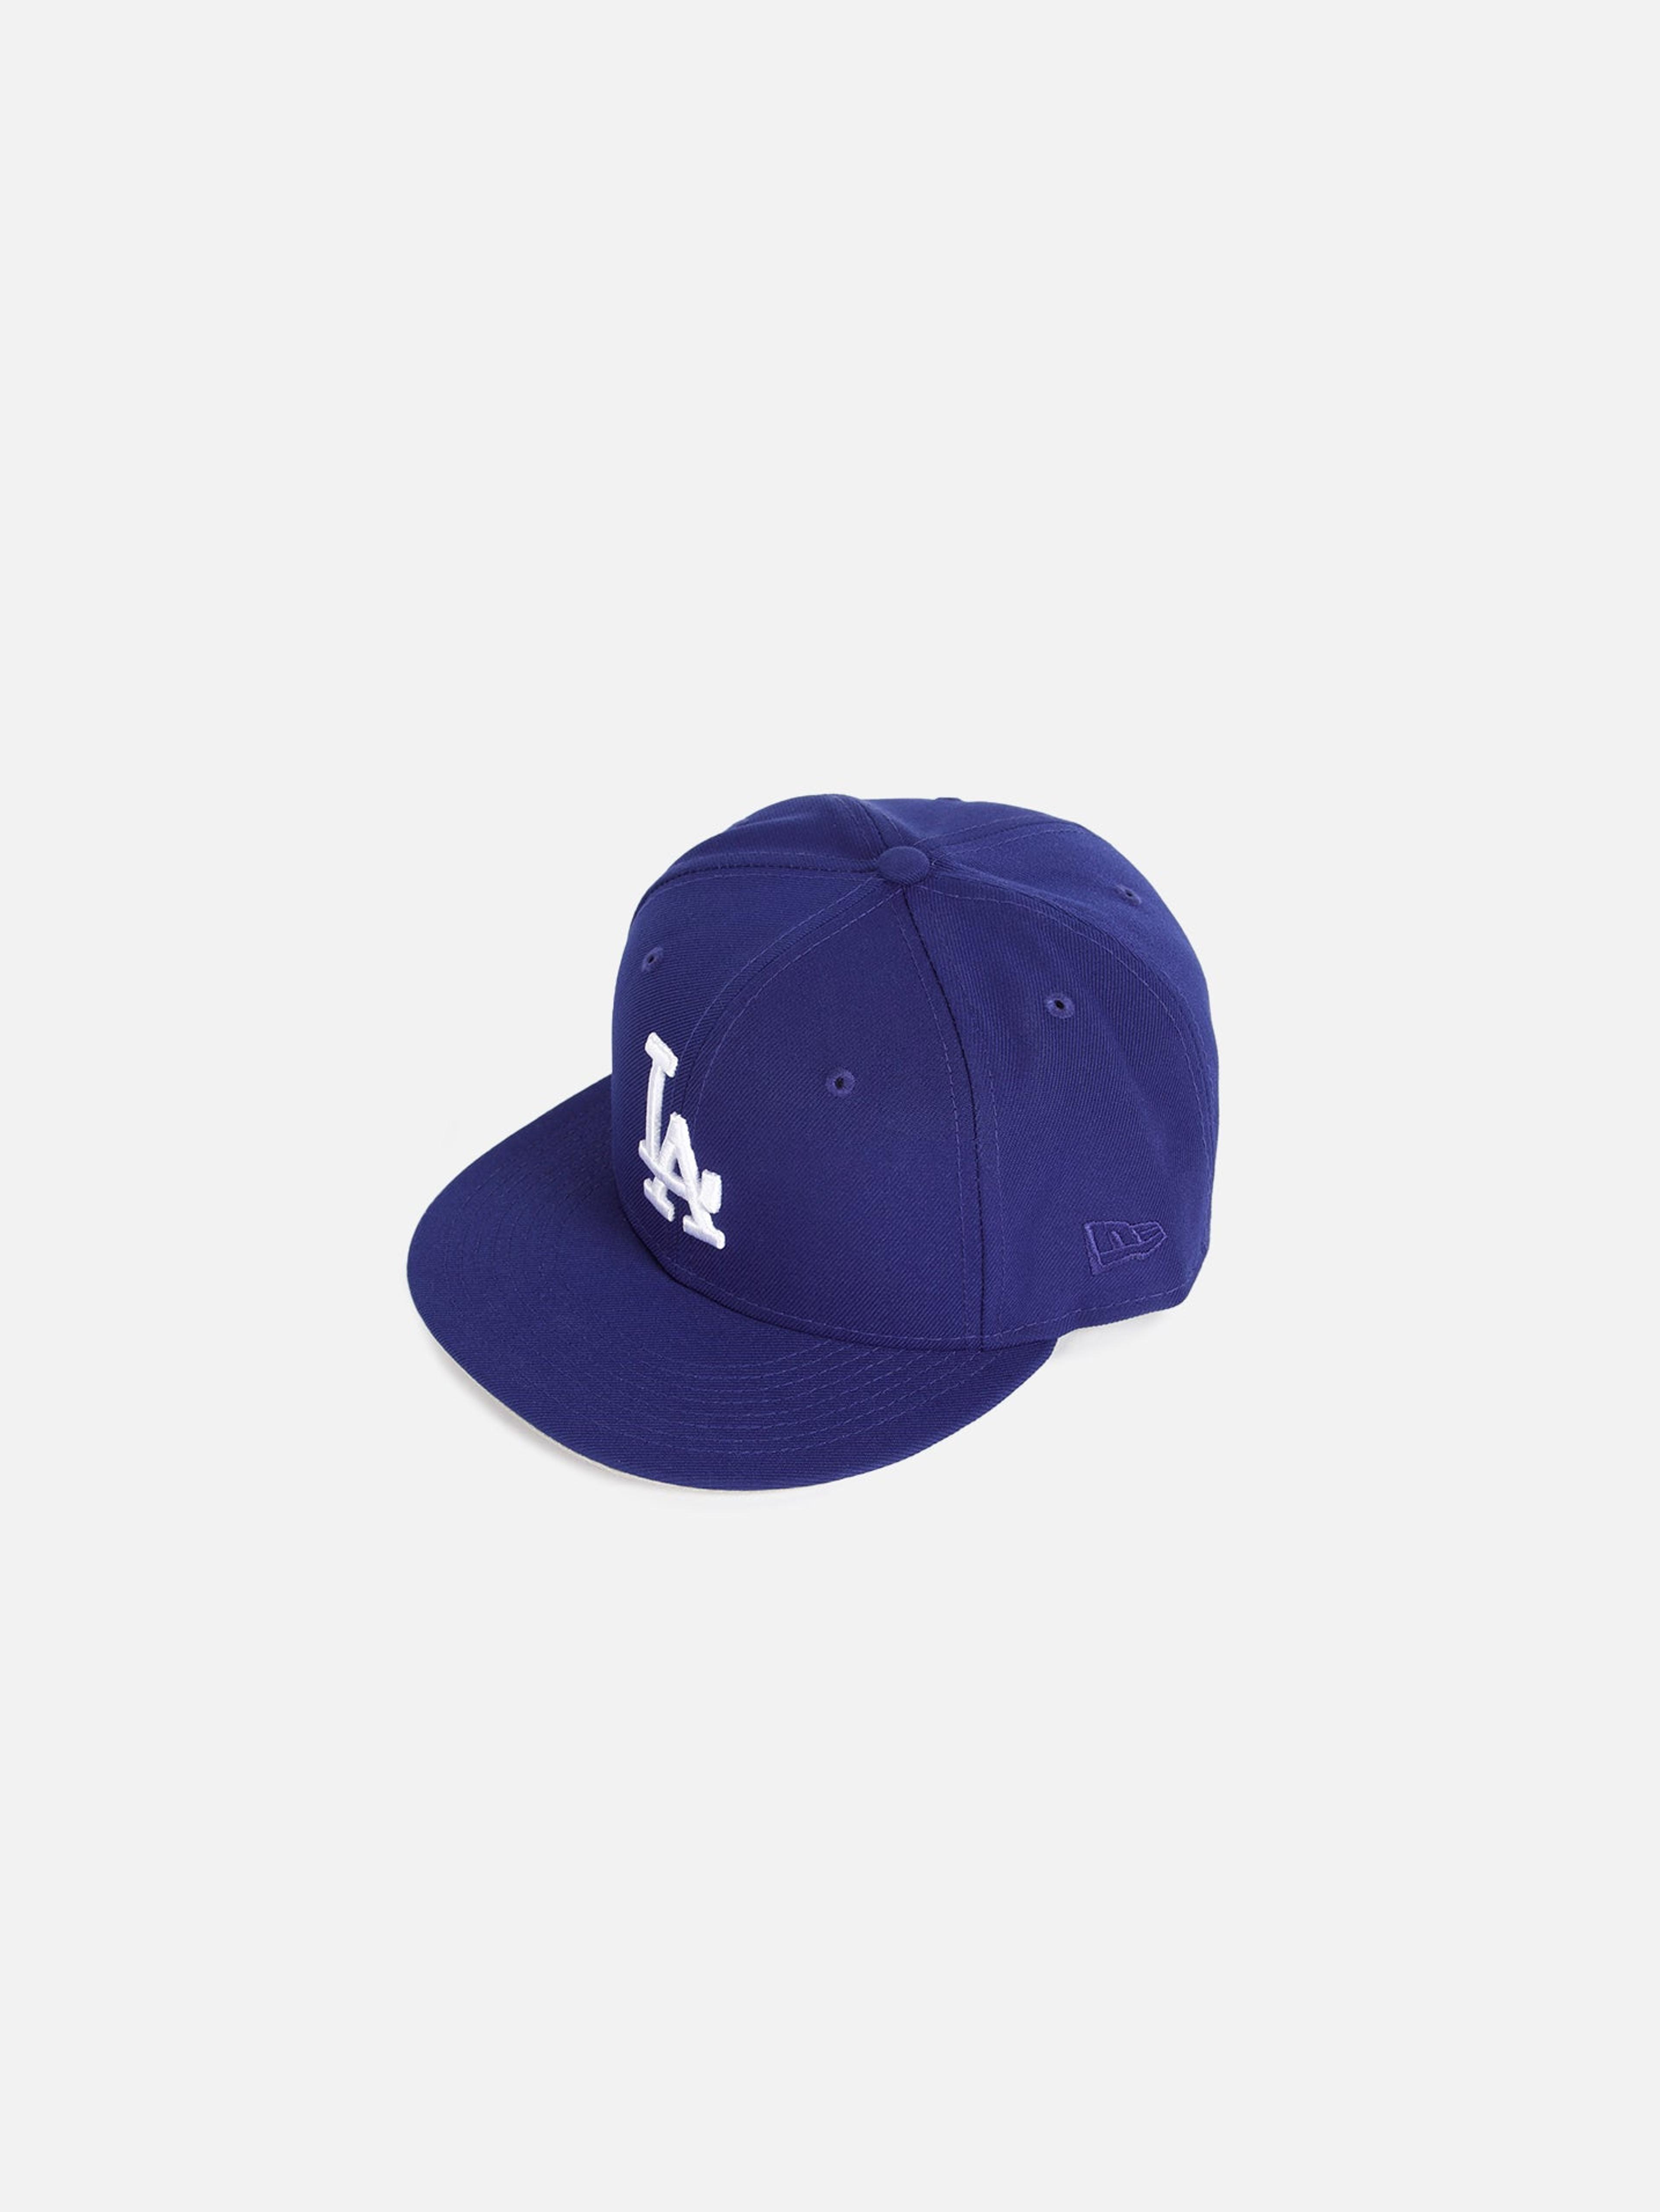 Alternate View 3 of Bricks & Wood x Dodgers New Era Fitted - Royal